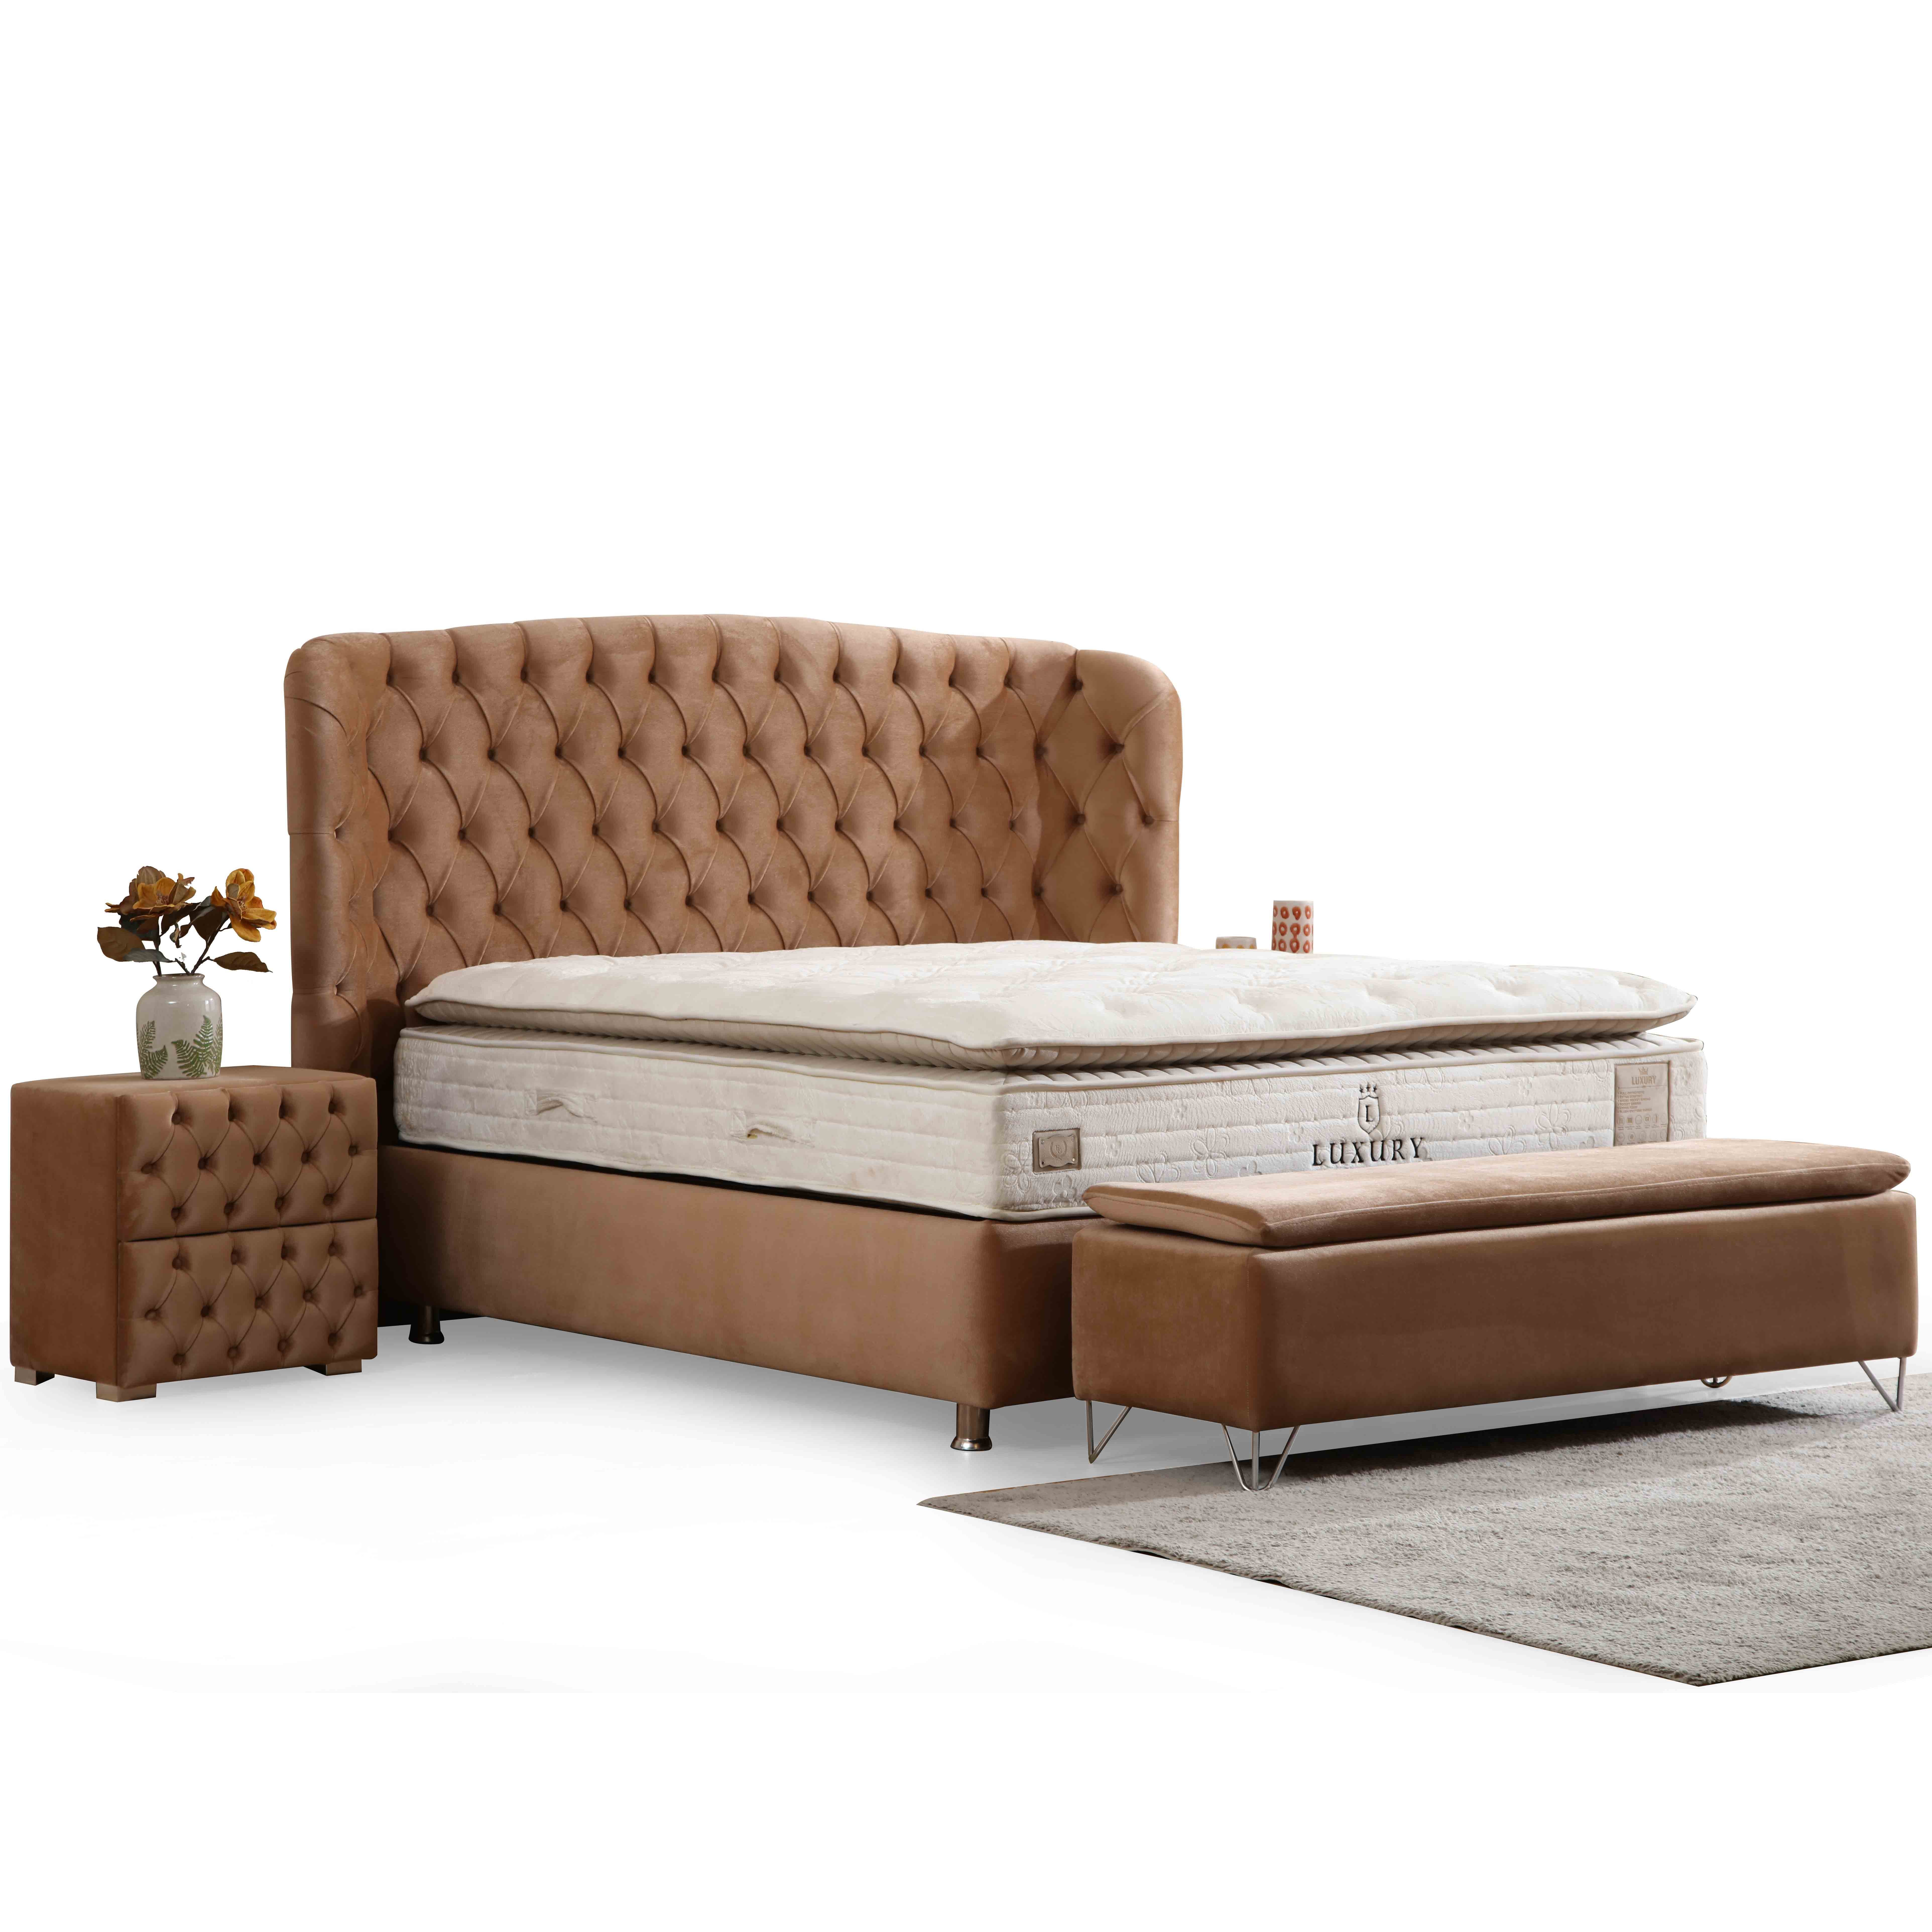 Riva Bed With Storage 140x190 cm